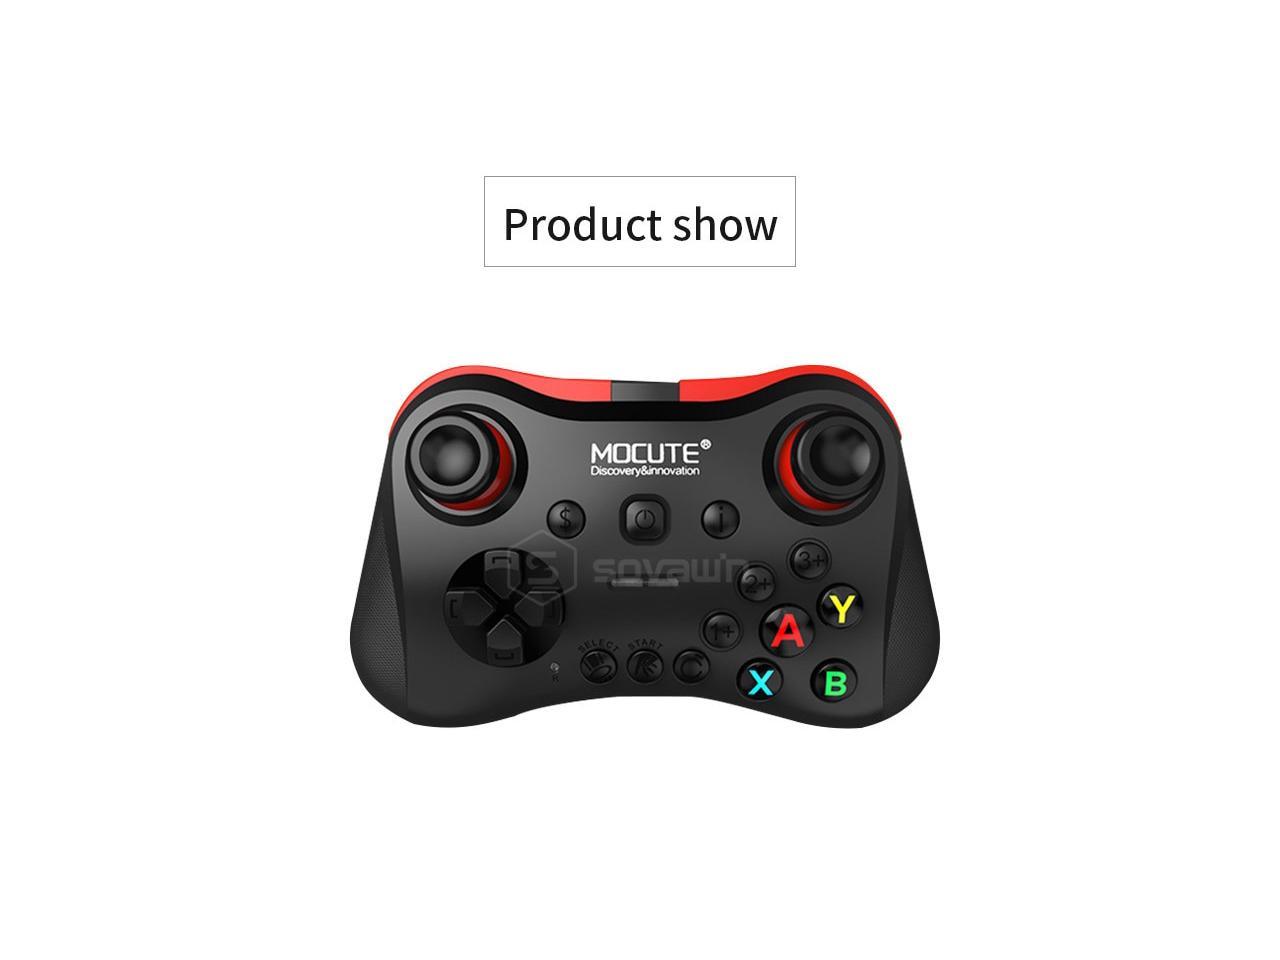 nationale vlag Onrecht servet Mocute 053 Gamepad Phone Joypad Bluetooth Android Joystick PC Wireless VR  Remote Control Game Pad For VR Smartphone Smart TV, Video Gaming, Gaming  Accessories, Controllers On Carousell | Mocute Androi D Gamepad